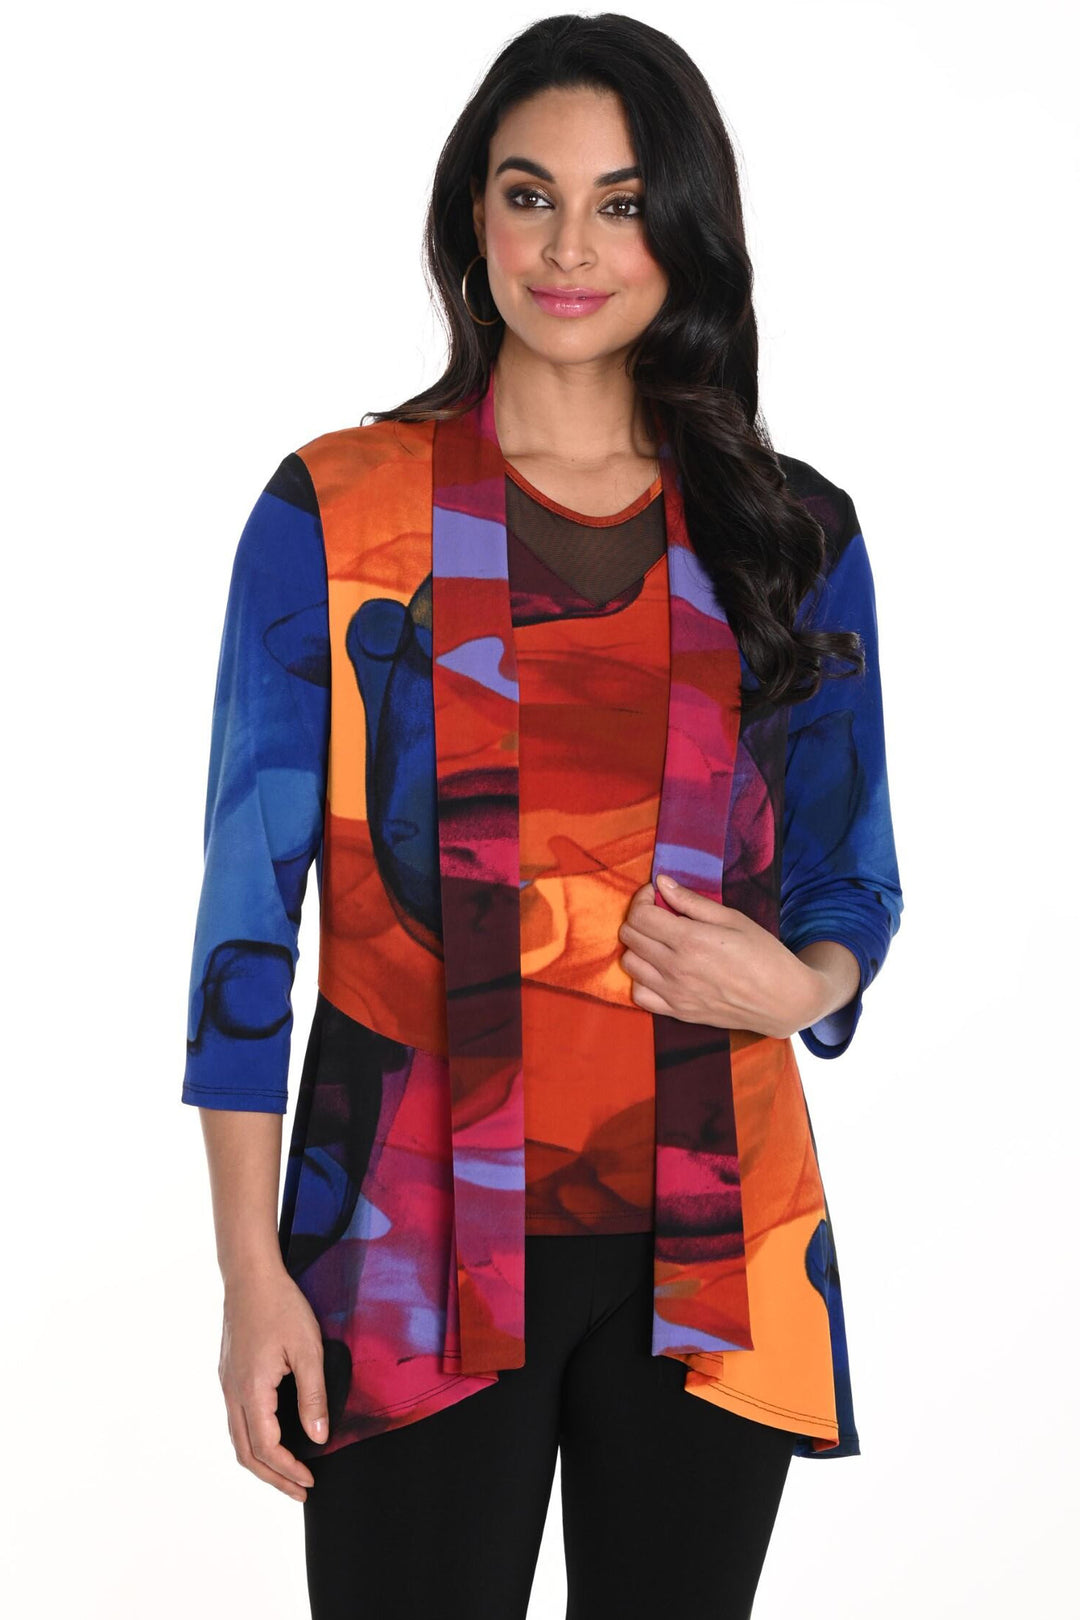 Frank Lyman Fall 2024 Made from ultra light and airy mesh fabric, this versatile piece can be dressed up or down, you choose! Its bright and colourful design will make a statement, while the simple cut jacket style keeps it effortlessly chic.